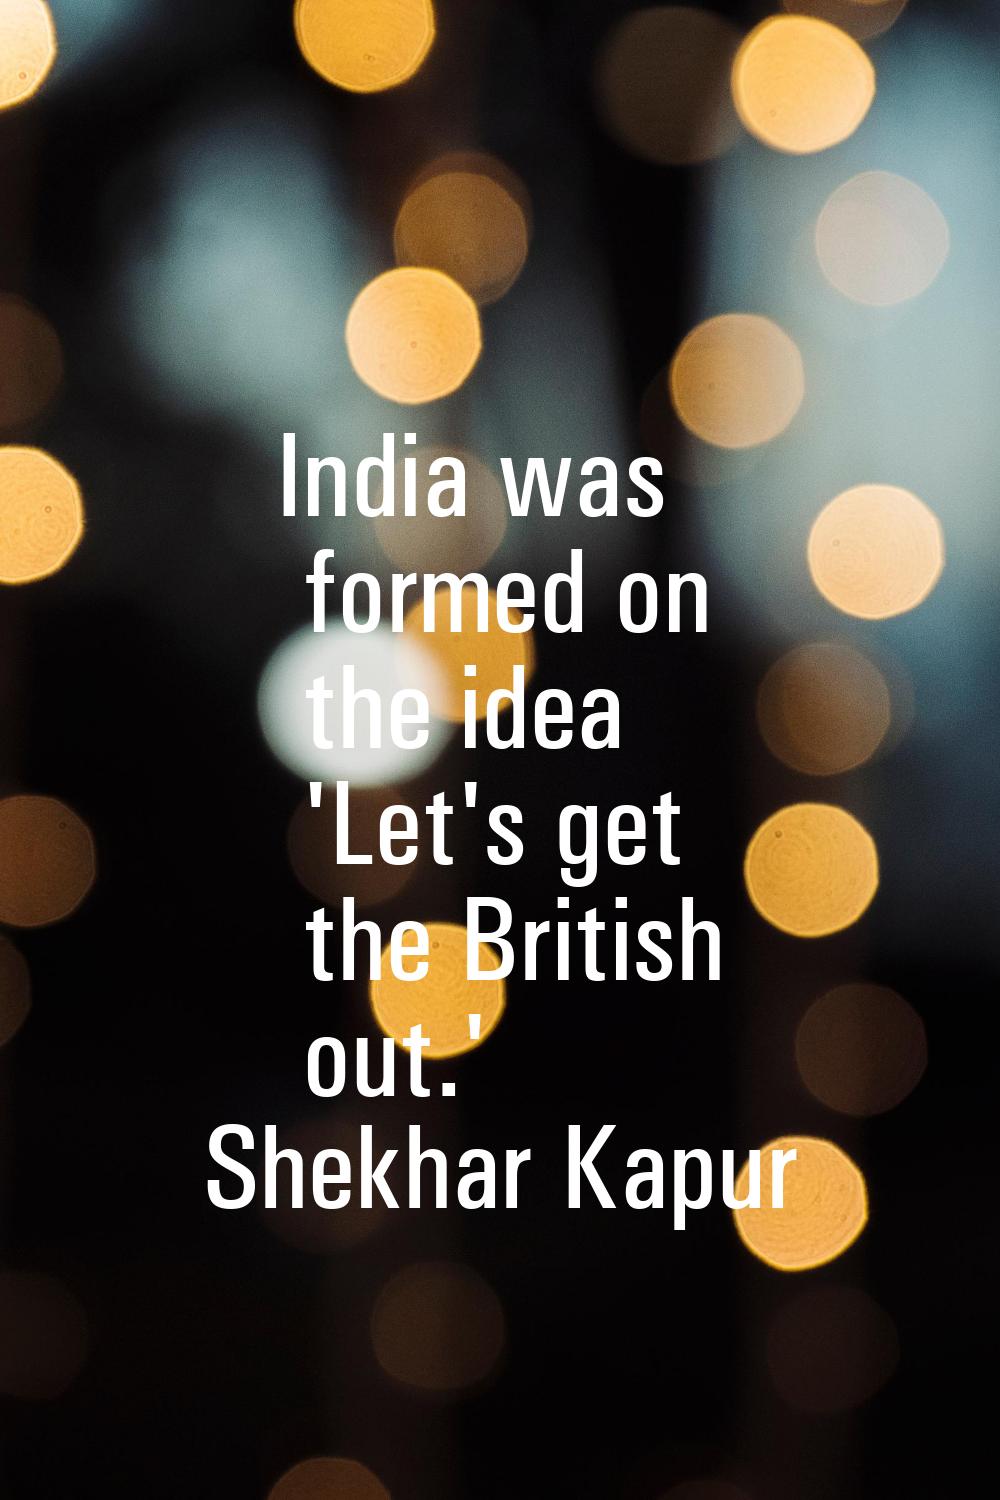 India was formed on the idea 'Let's get the British out.'